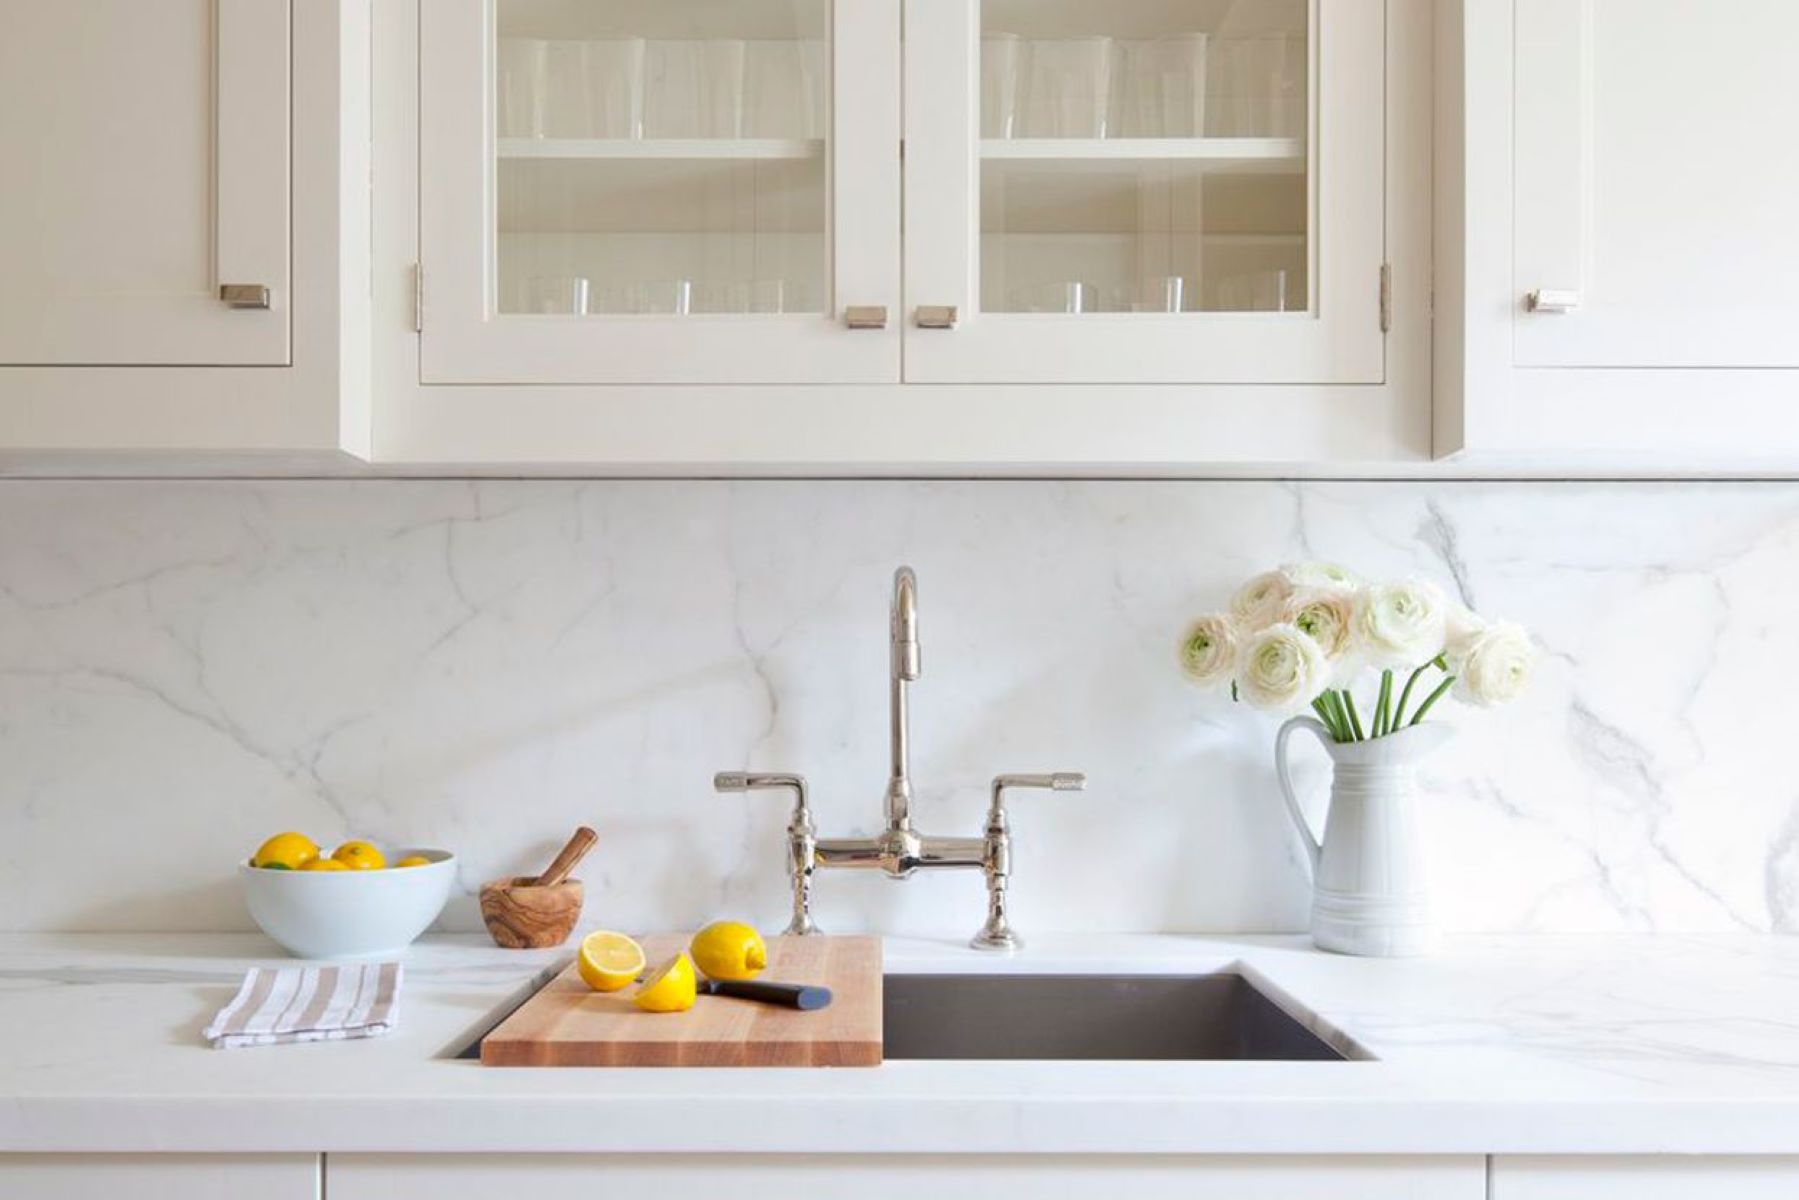 What Backsplash Goes With White Marble Countertops